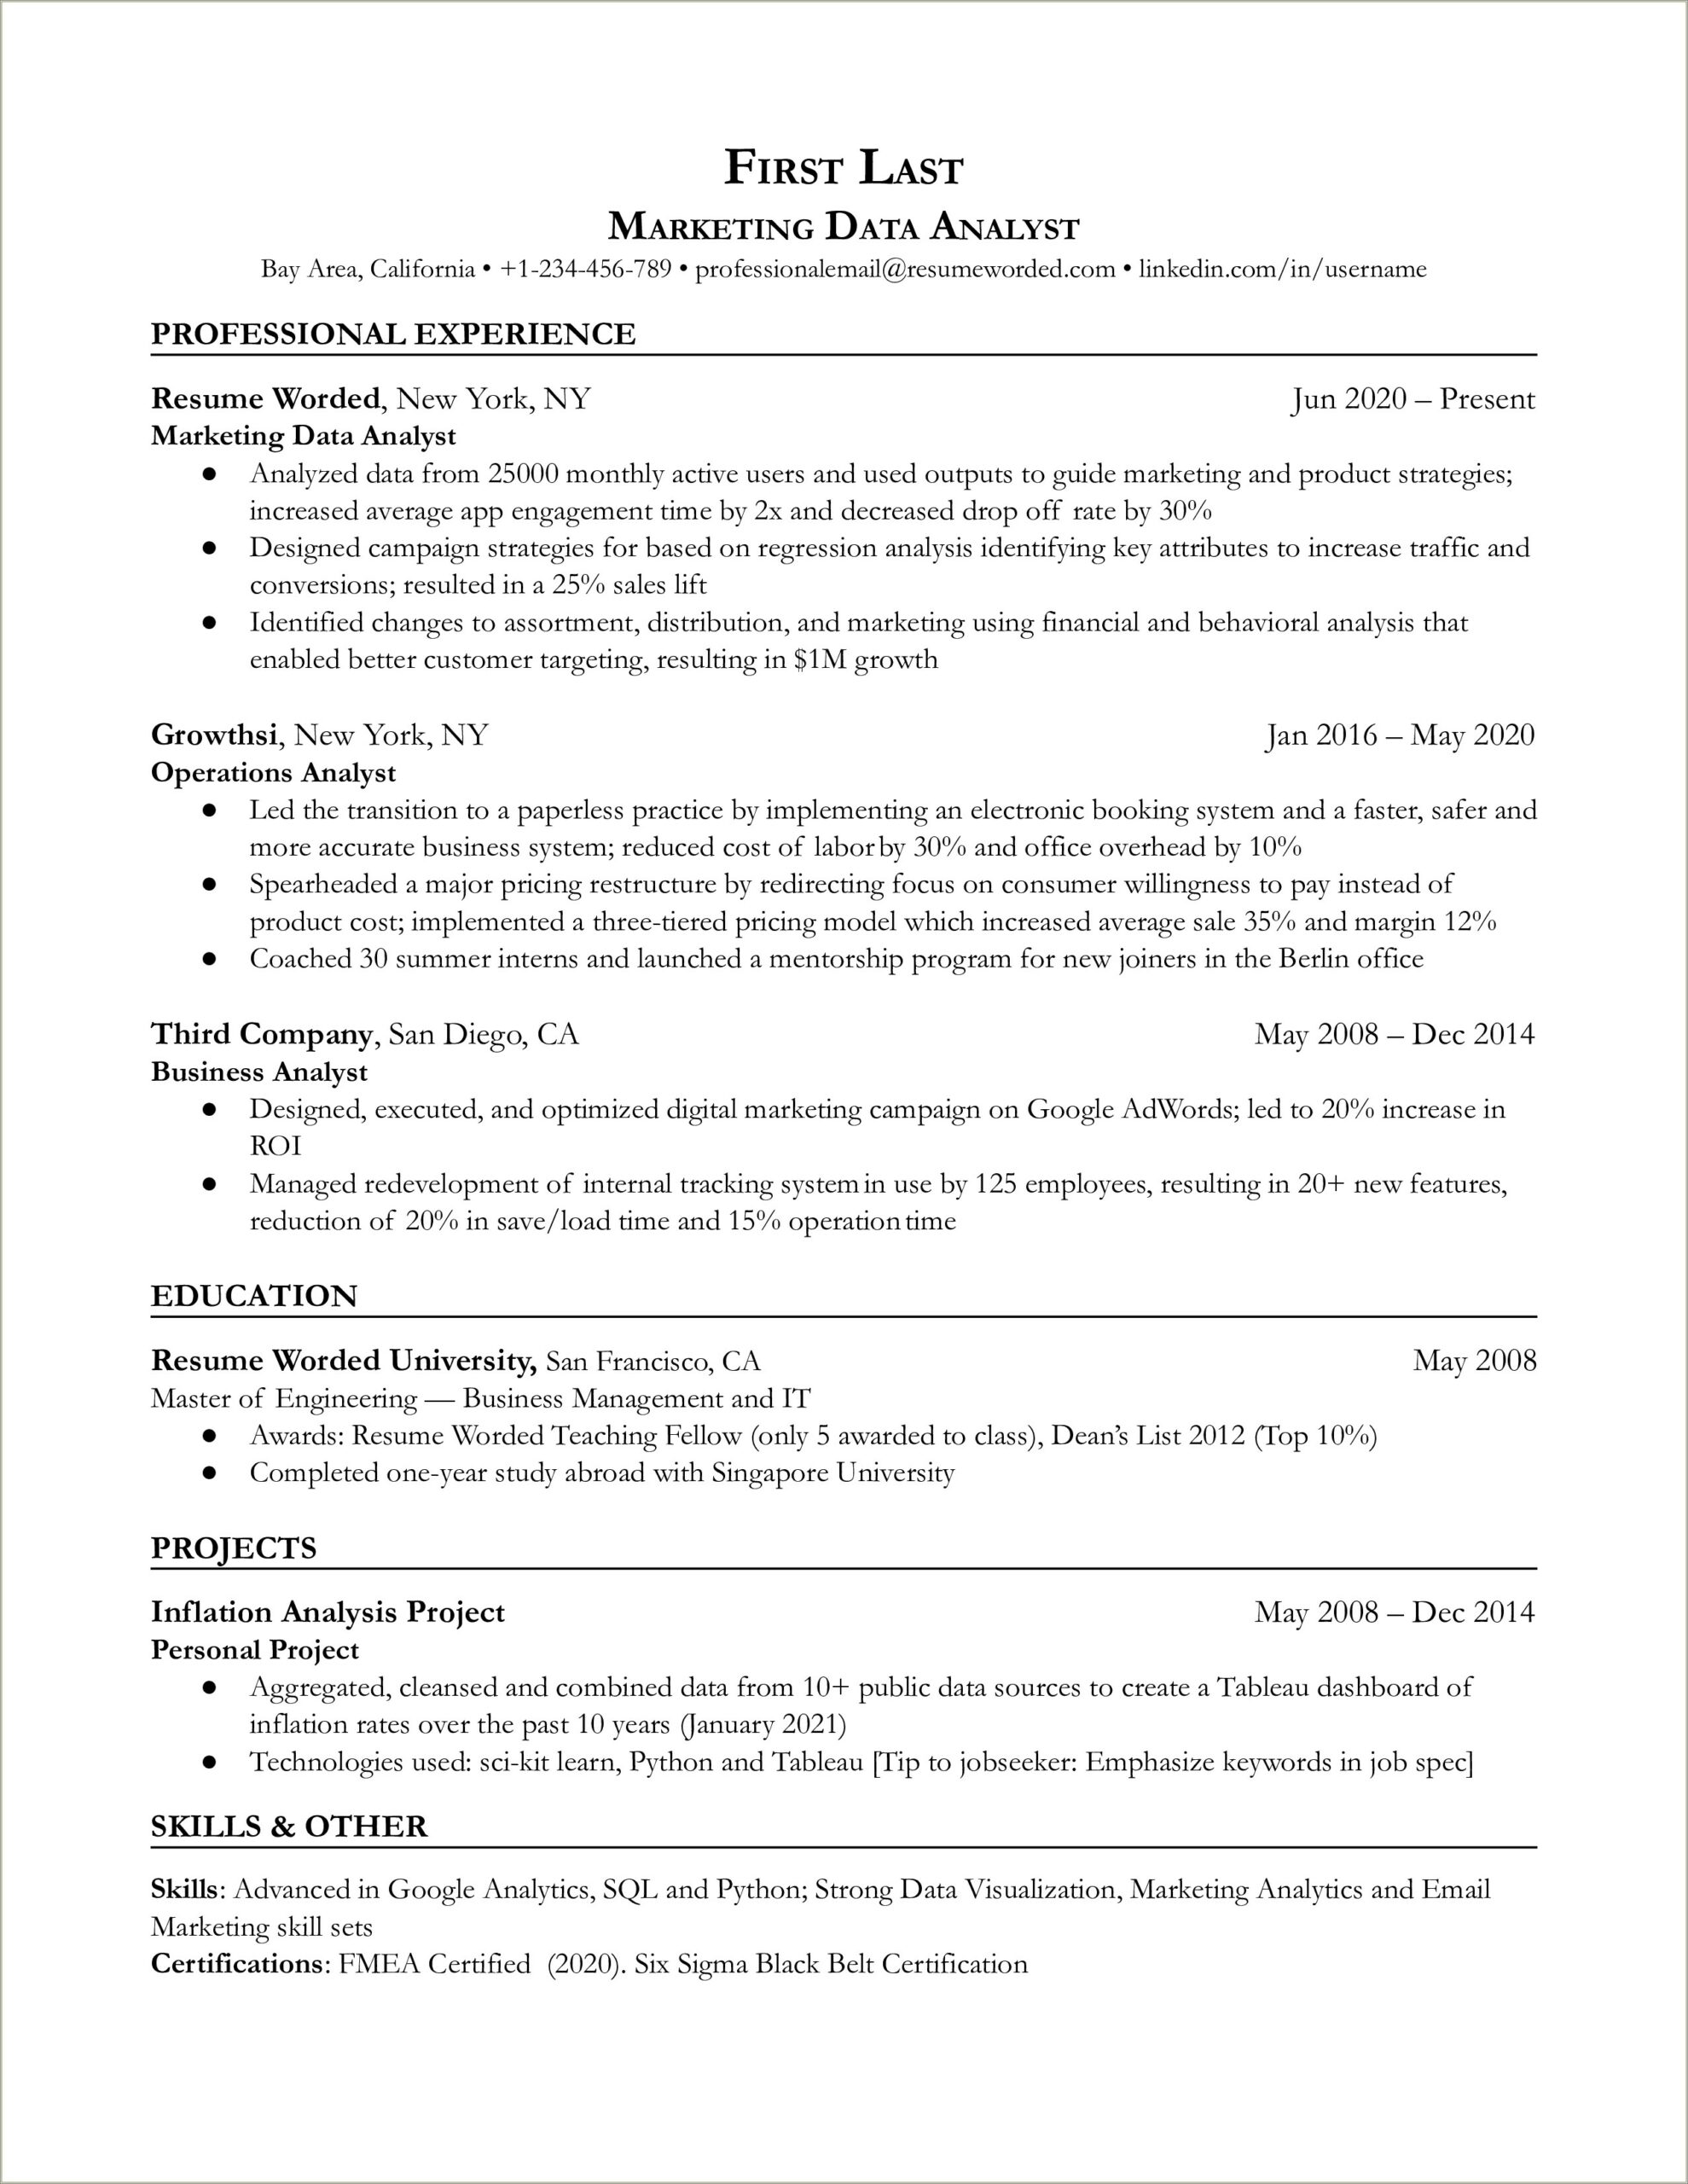 Data Analysis For A Business Sales Job Resume